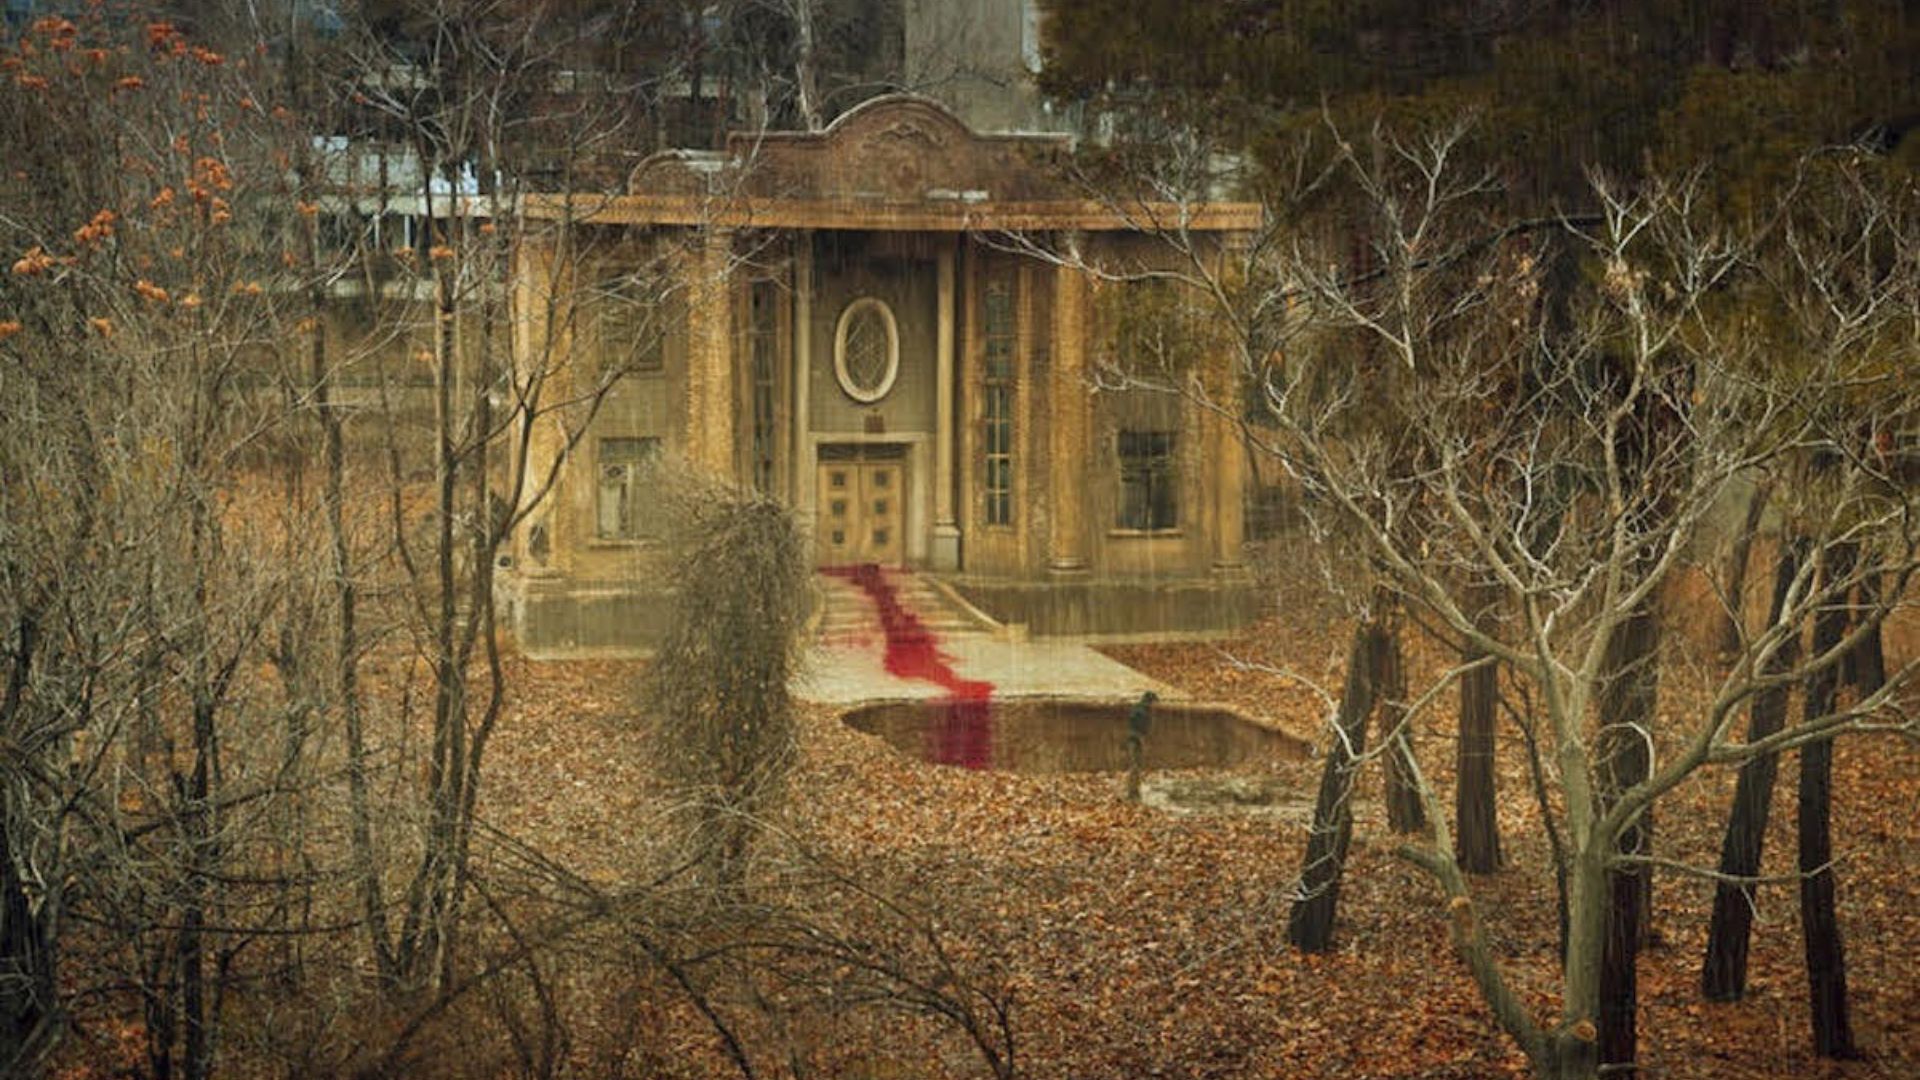 old building in woods with trail of blood at building door